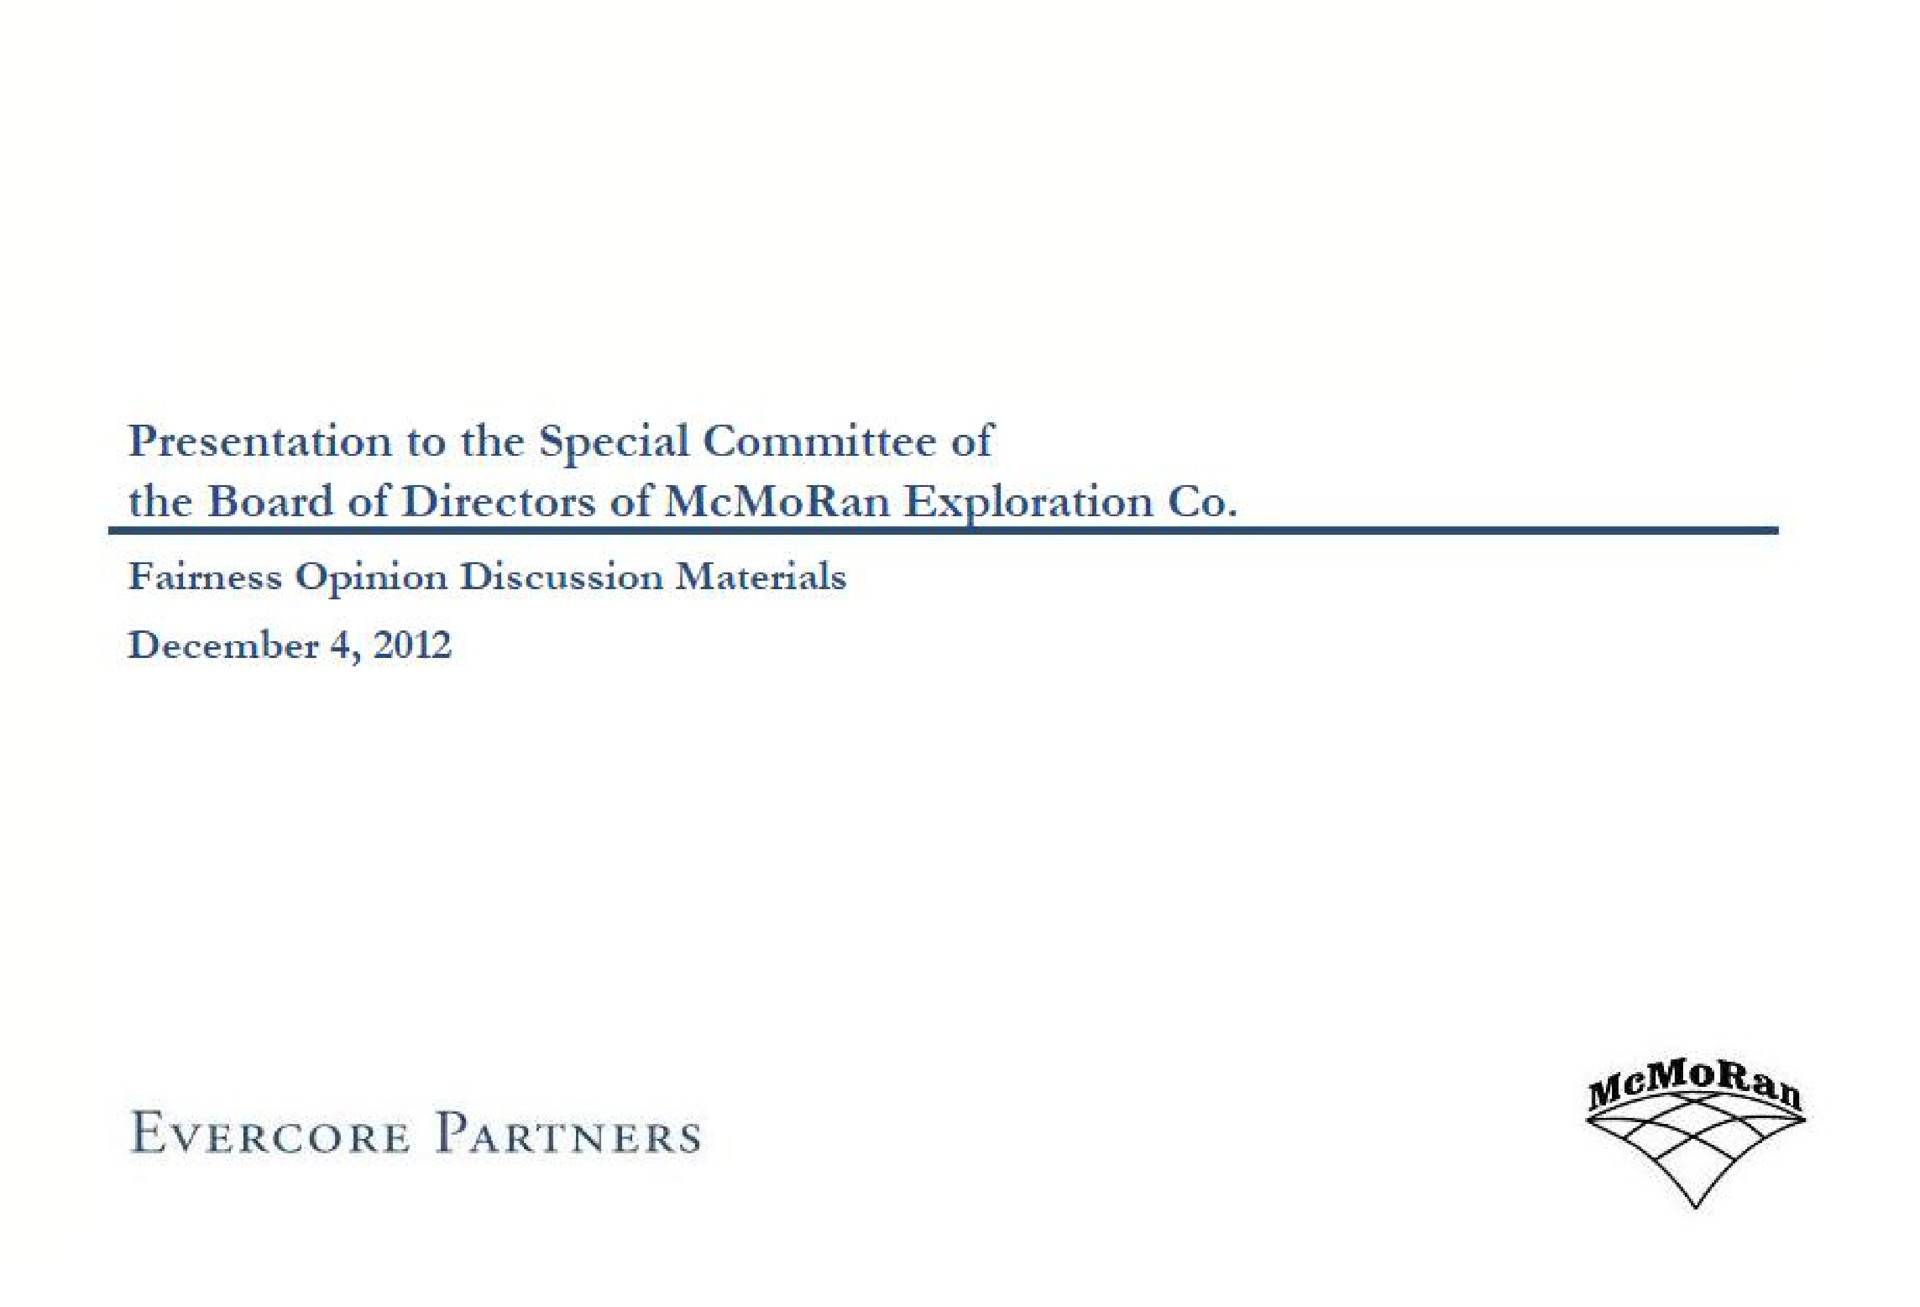 presentation to the special committee of the board of directors of exploration fairness opinion discussion materials partners | Evercore